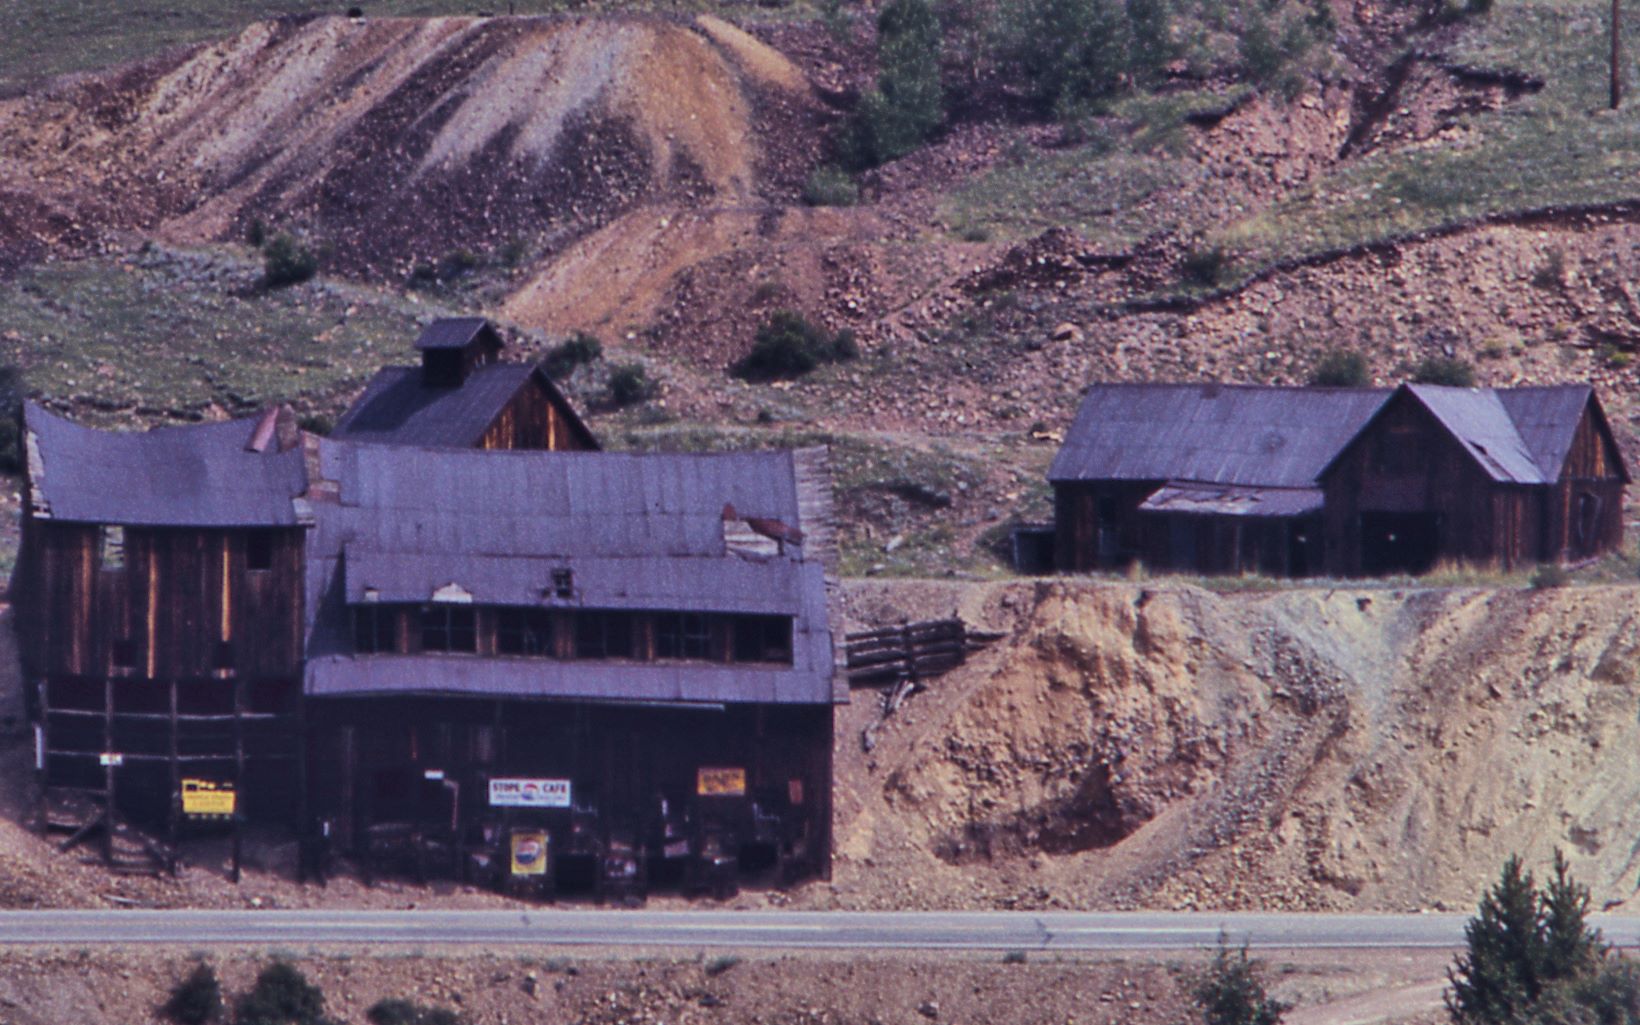 This cropped view of a slide photo from 1968 shows what is left of the Anaconda Mine structures. The Road in front of the Ore-House was the former F. & C.C. roadbed, which turned into a road when that railroad was gone, and which was later the main road between Victor and Cripple Creek towns, but today all this is gone, road and everything.
   Closest to the road is the Anaconda mine Orehouse, with the Blacksmith and its cupola visible behind it, and to the right is what appears to be a tunnel opening, just left of what appears to possible be the Powerplant Structure when looking at a Sanborn 1908 Fire Insurance Map, or the Office, maybe also just be a shed like structure. Behind the structures is the former roadbed of the Midland Terminal seen, at about middle top/down, coming from left-hand side, and entering a cut behind the shed/possible powerplant structure, at the right-hand side.